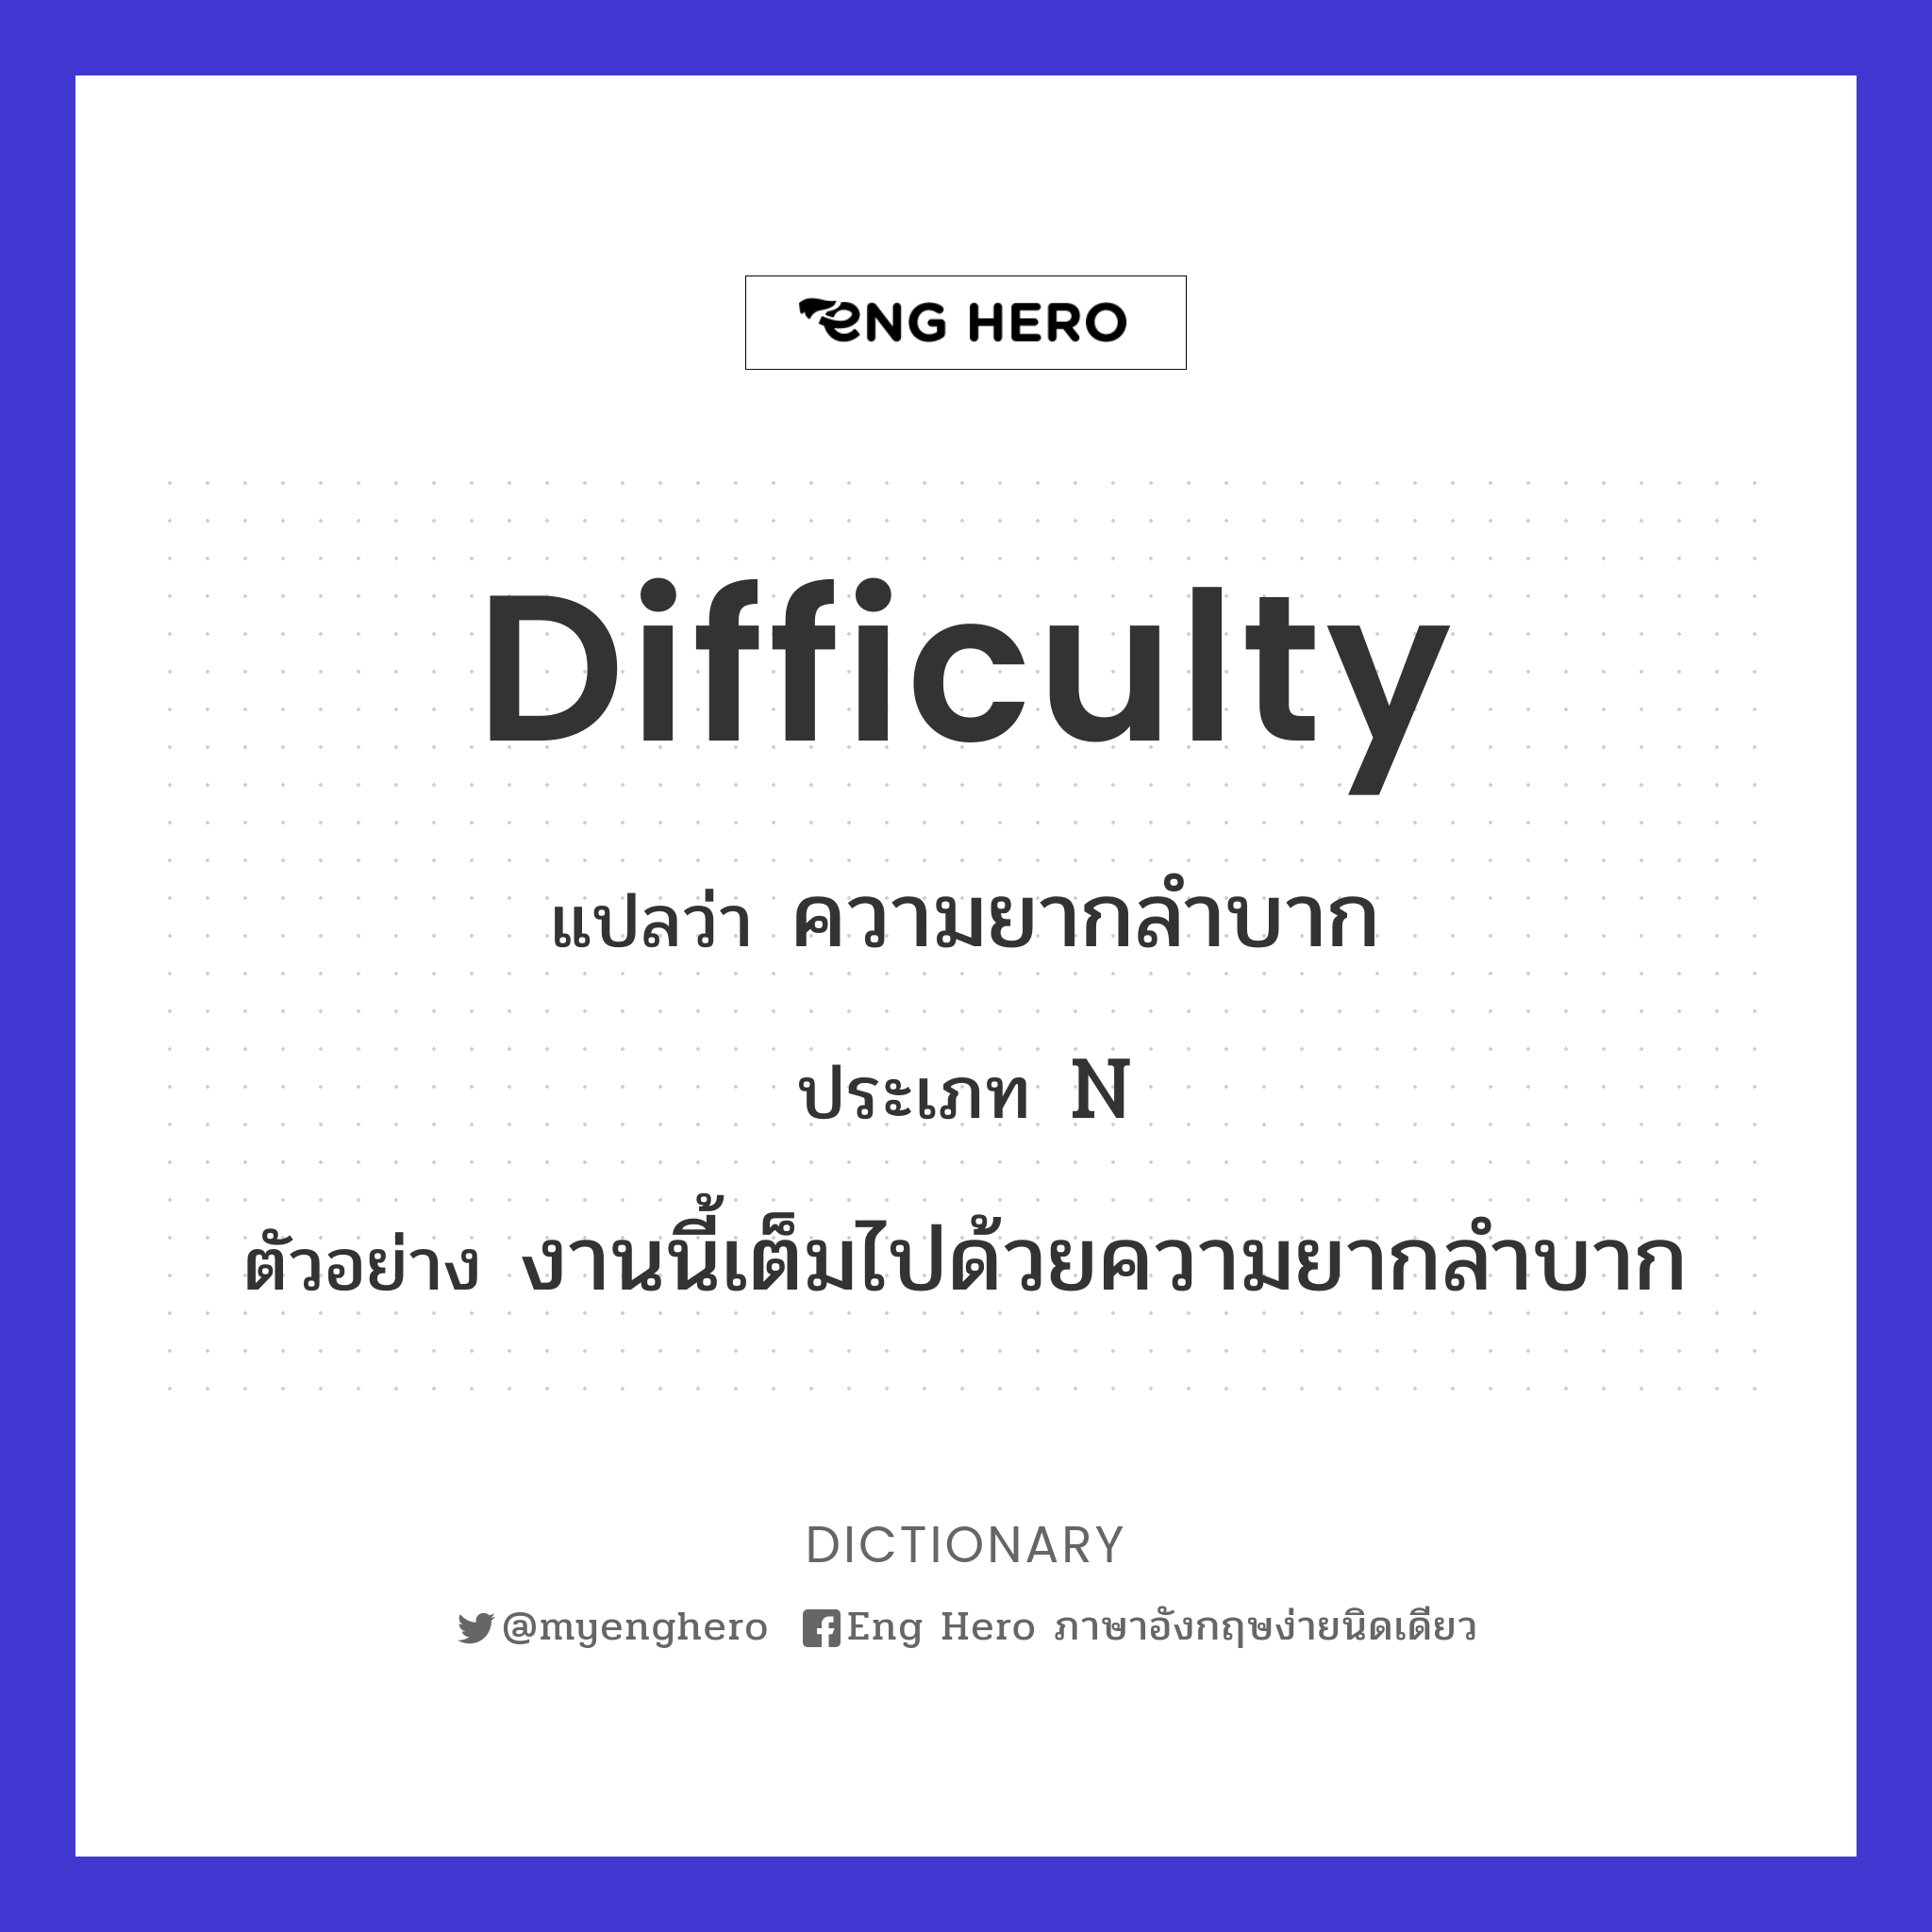 difficulty